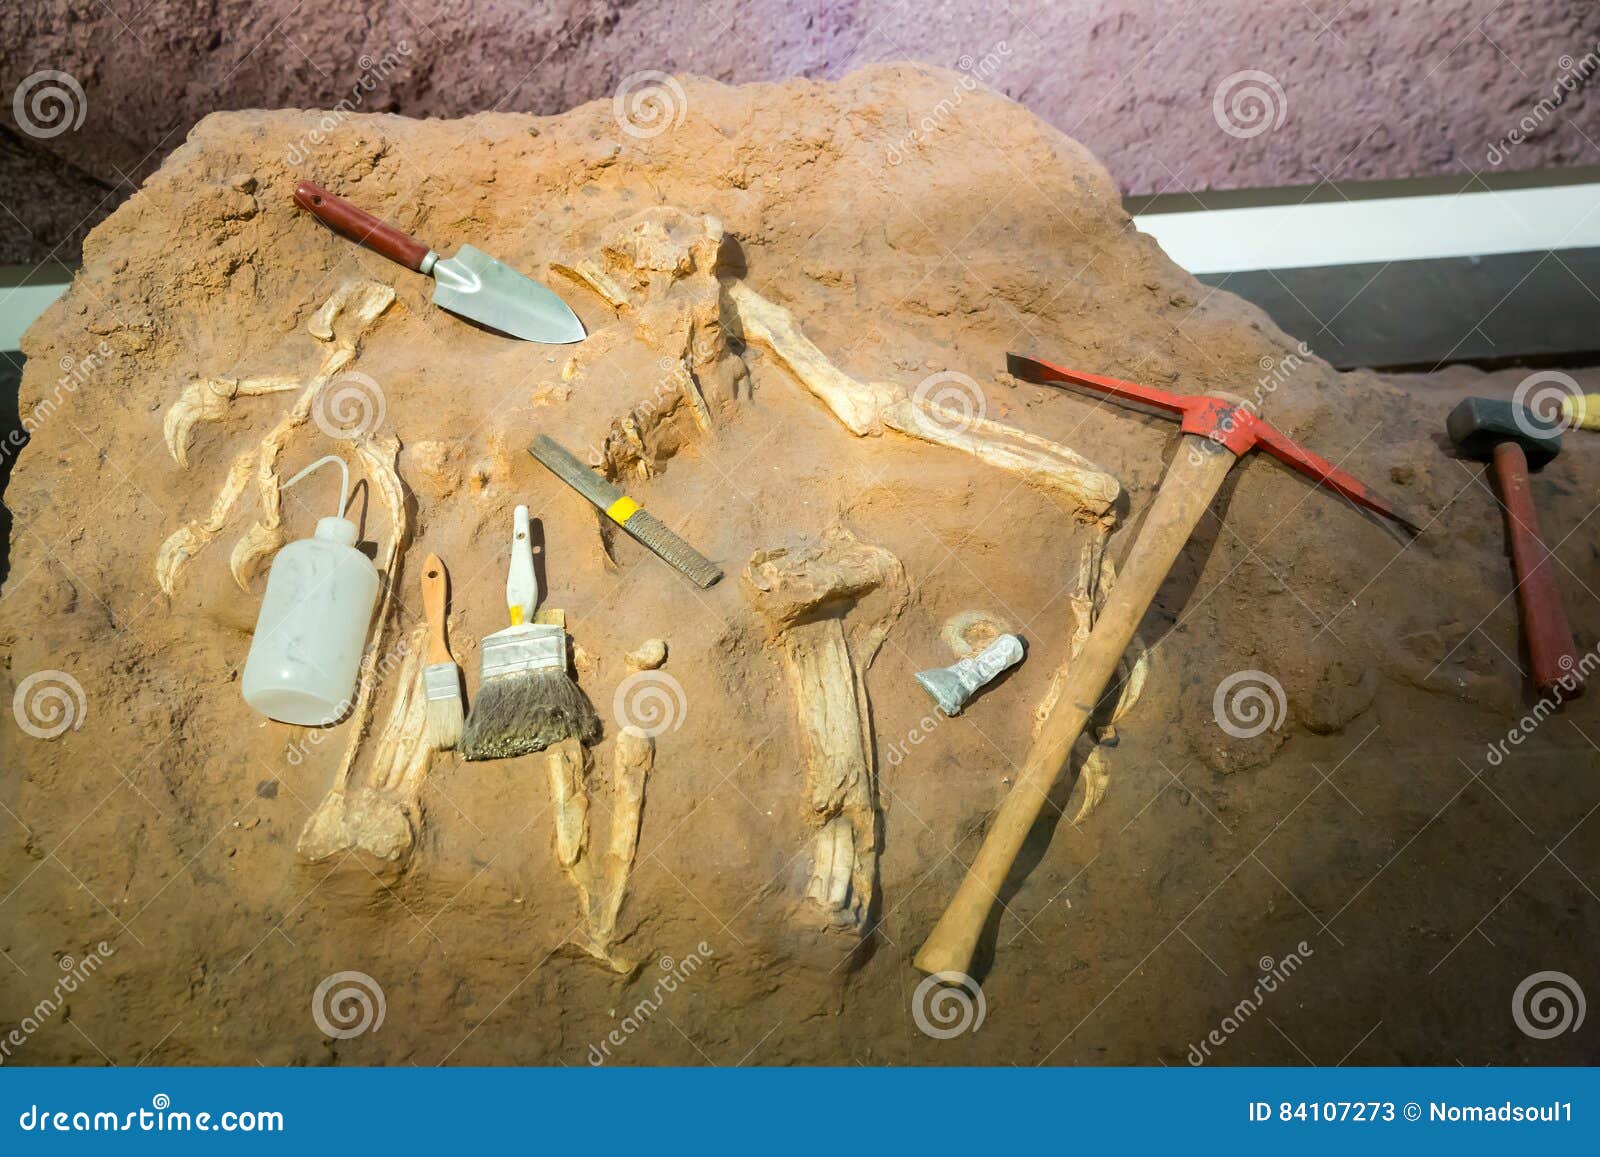 skeleton and archaeological tools around.